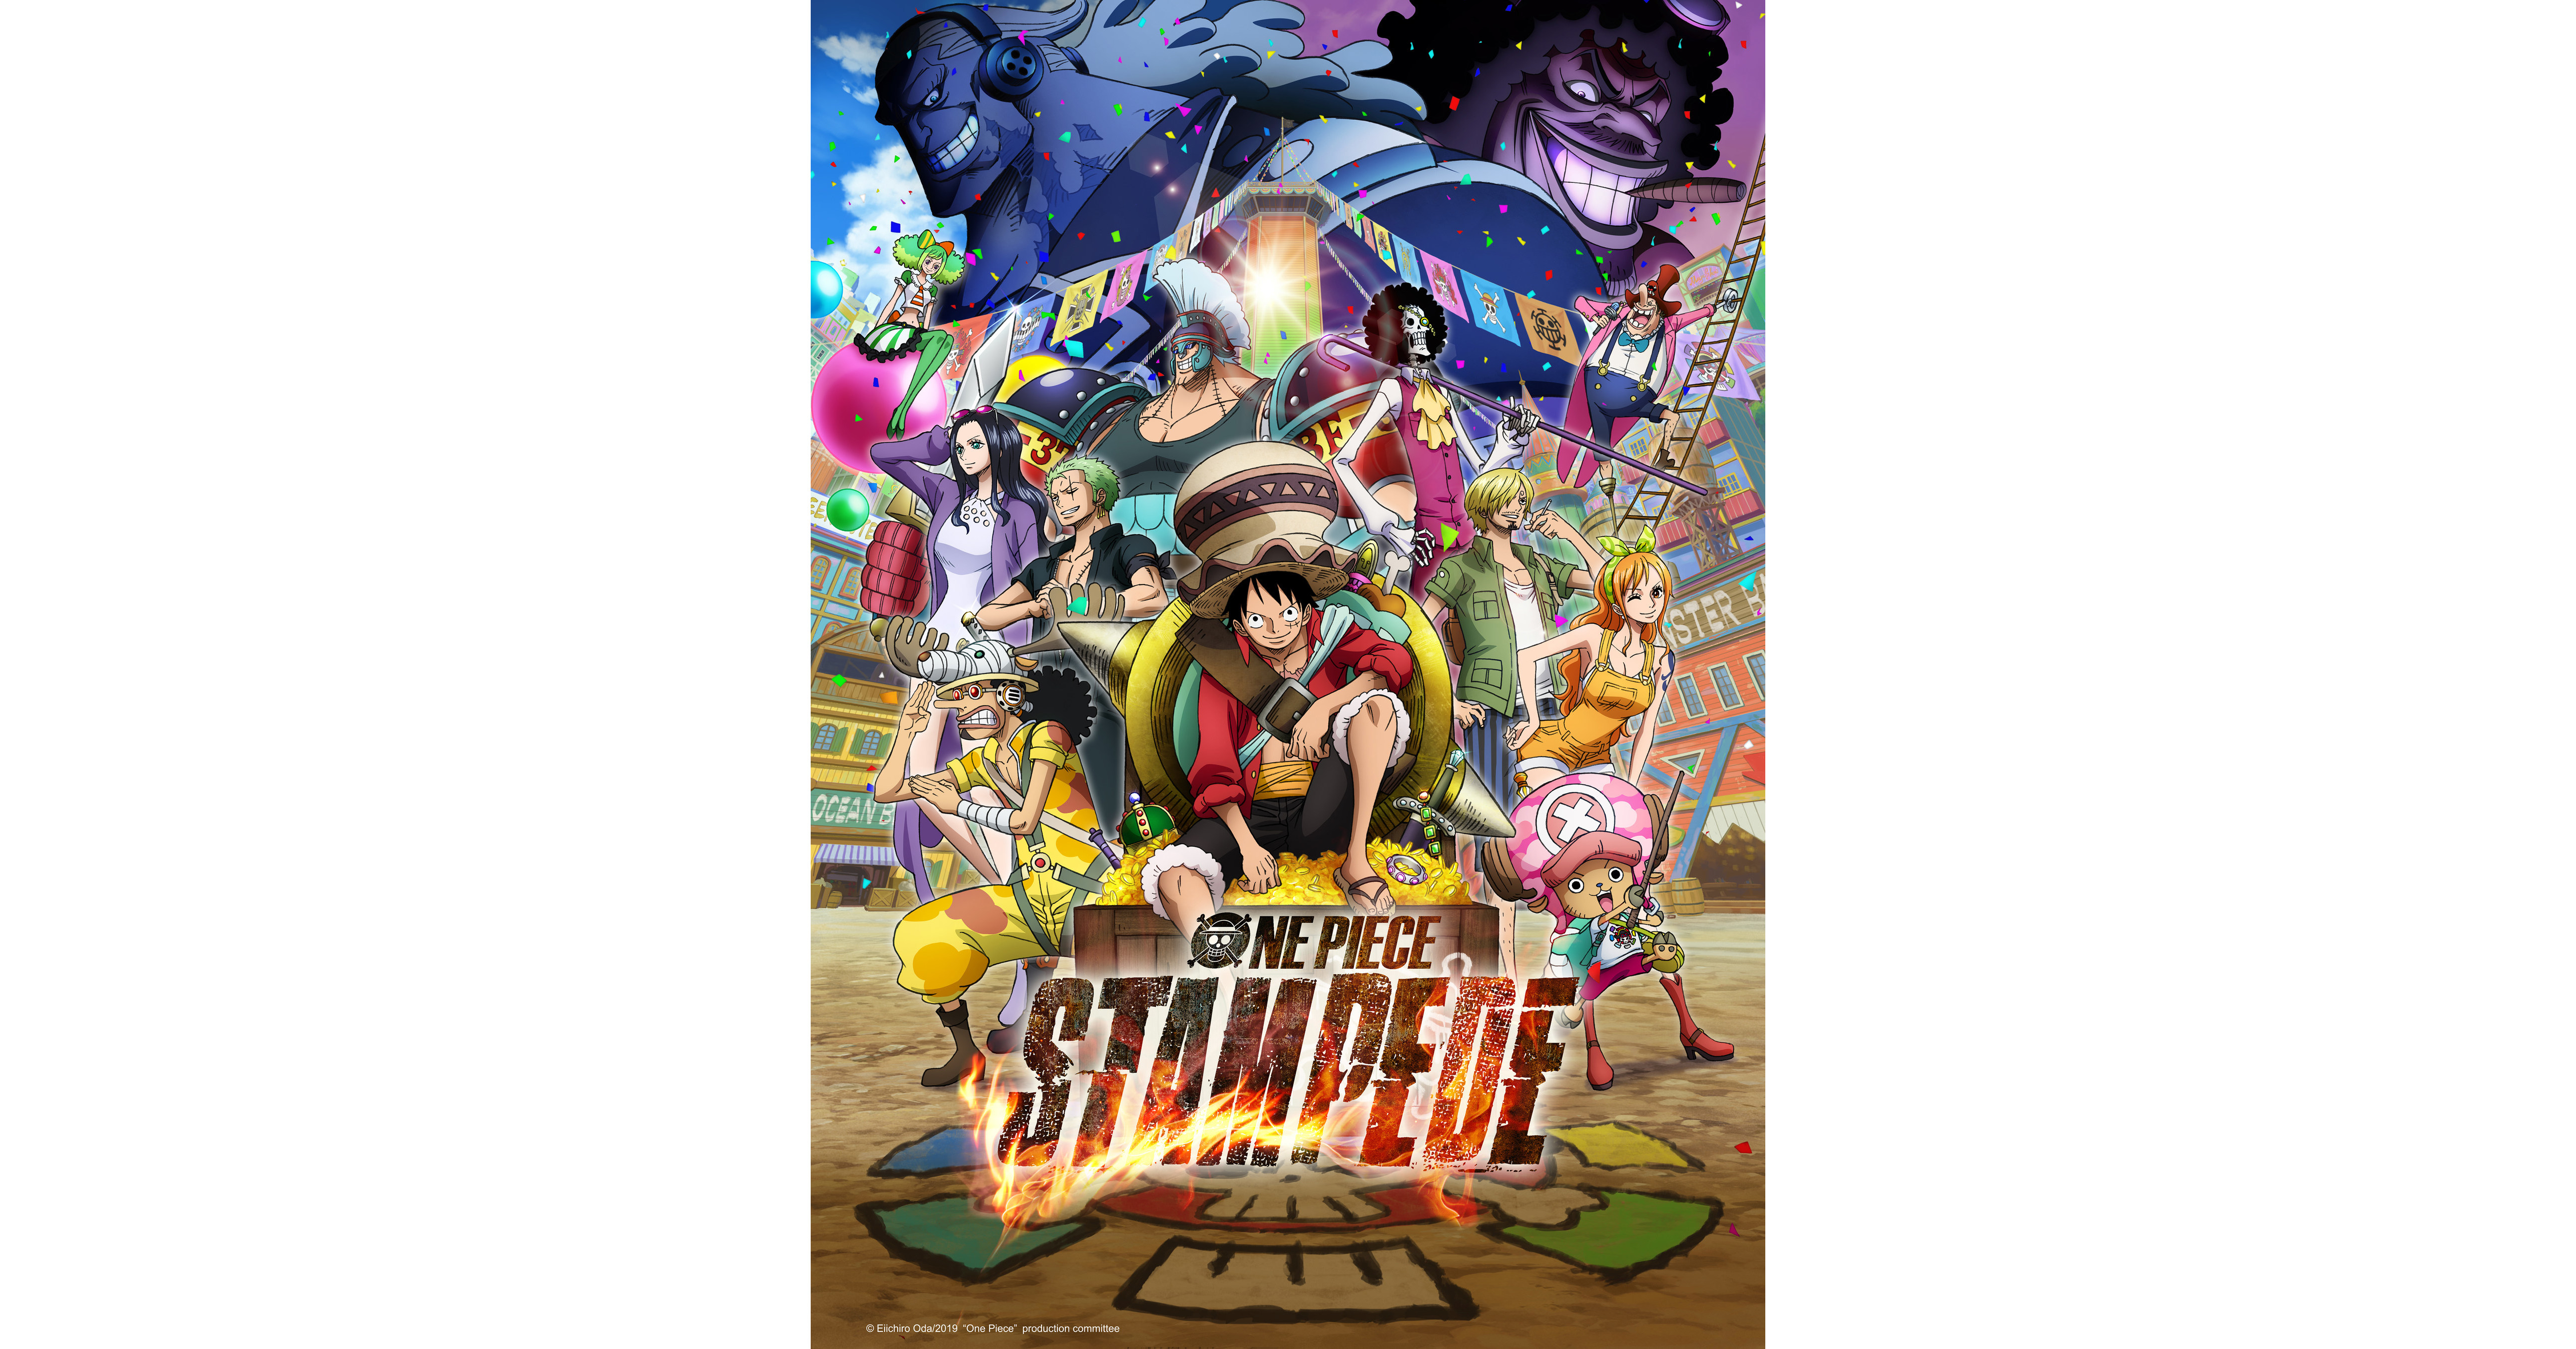 th Anniversary Feature Film One Piece Stampede Gallops Into North American Theaters This Fall